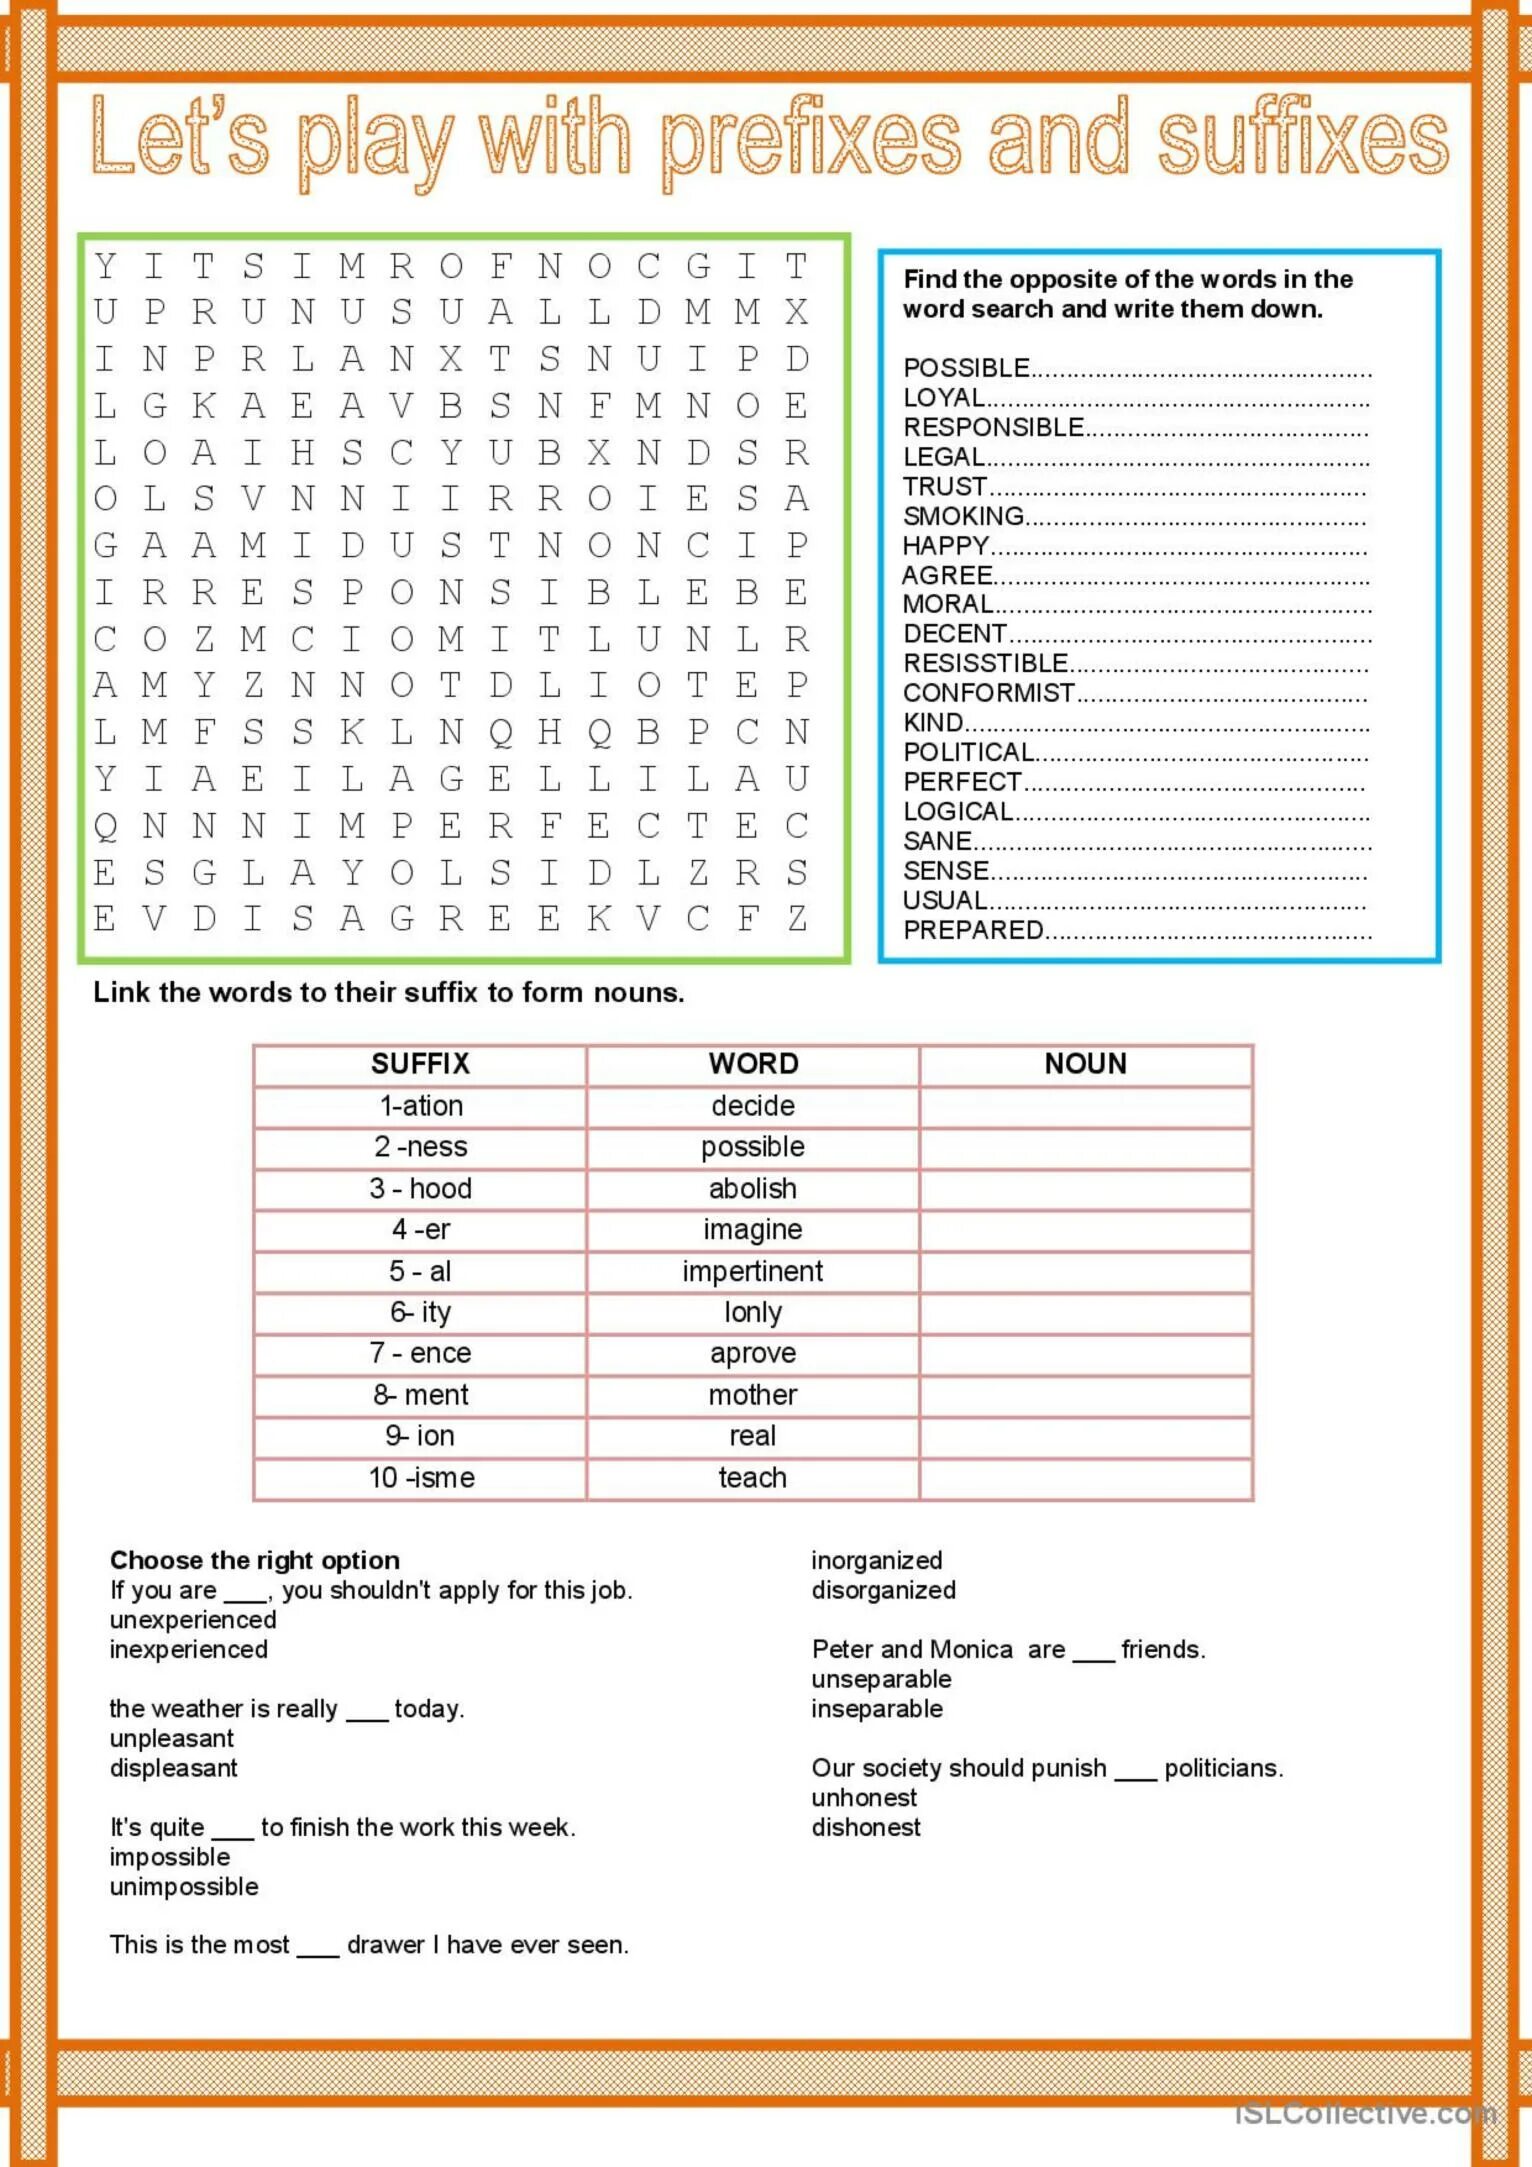 Form nouns from the words in bold. Word formation suffixes and prefixes. Verb suffixes in English. Suffixes of Nouns упражнения Worksheets. Word formation упражнения Worksheet.